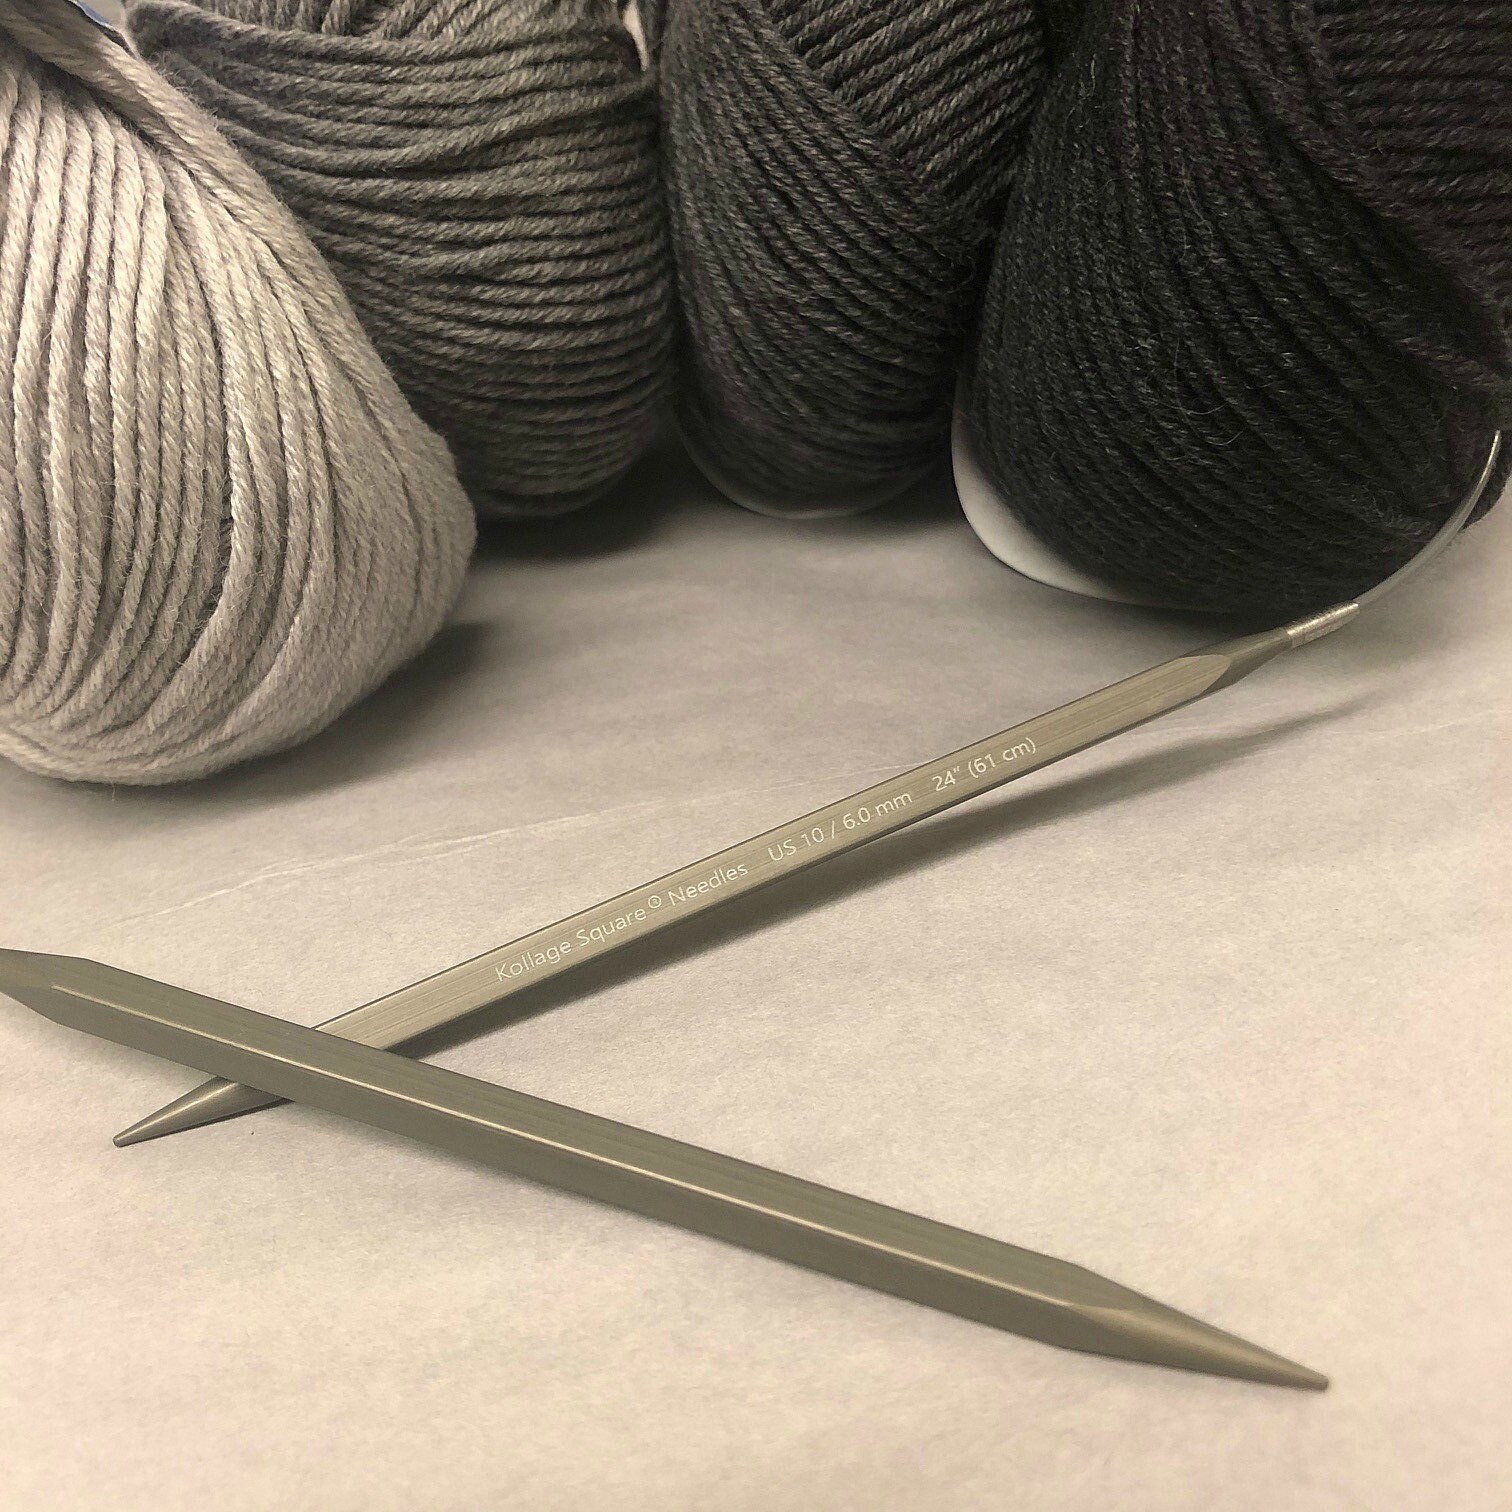 Double Pointed Needles - kollage SQUARE™